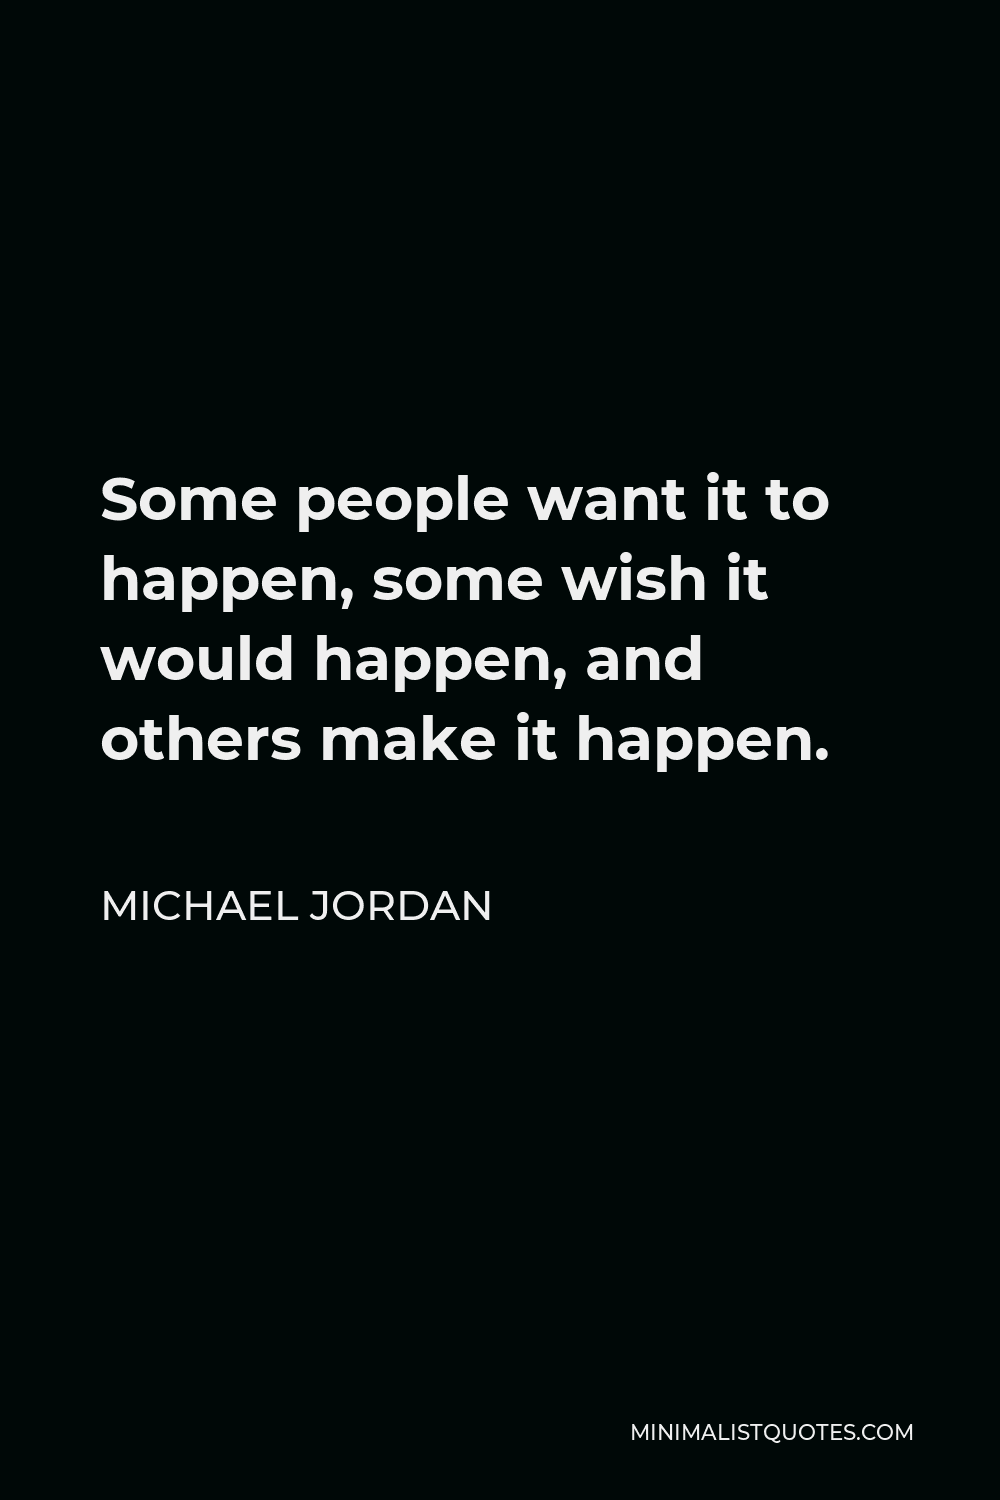 Michael Jordan Quote Some People Want It To Happen Some Wish It Would Happen And Others Make It Happen